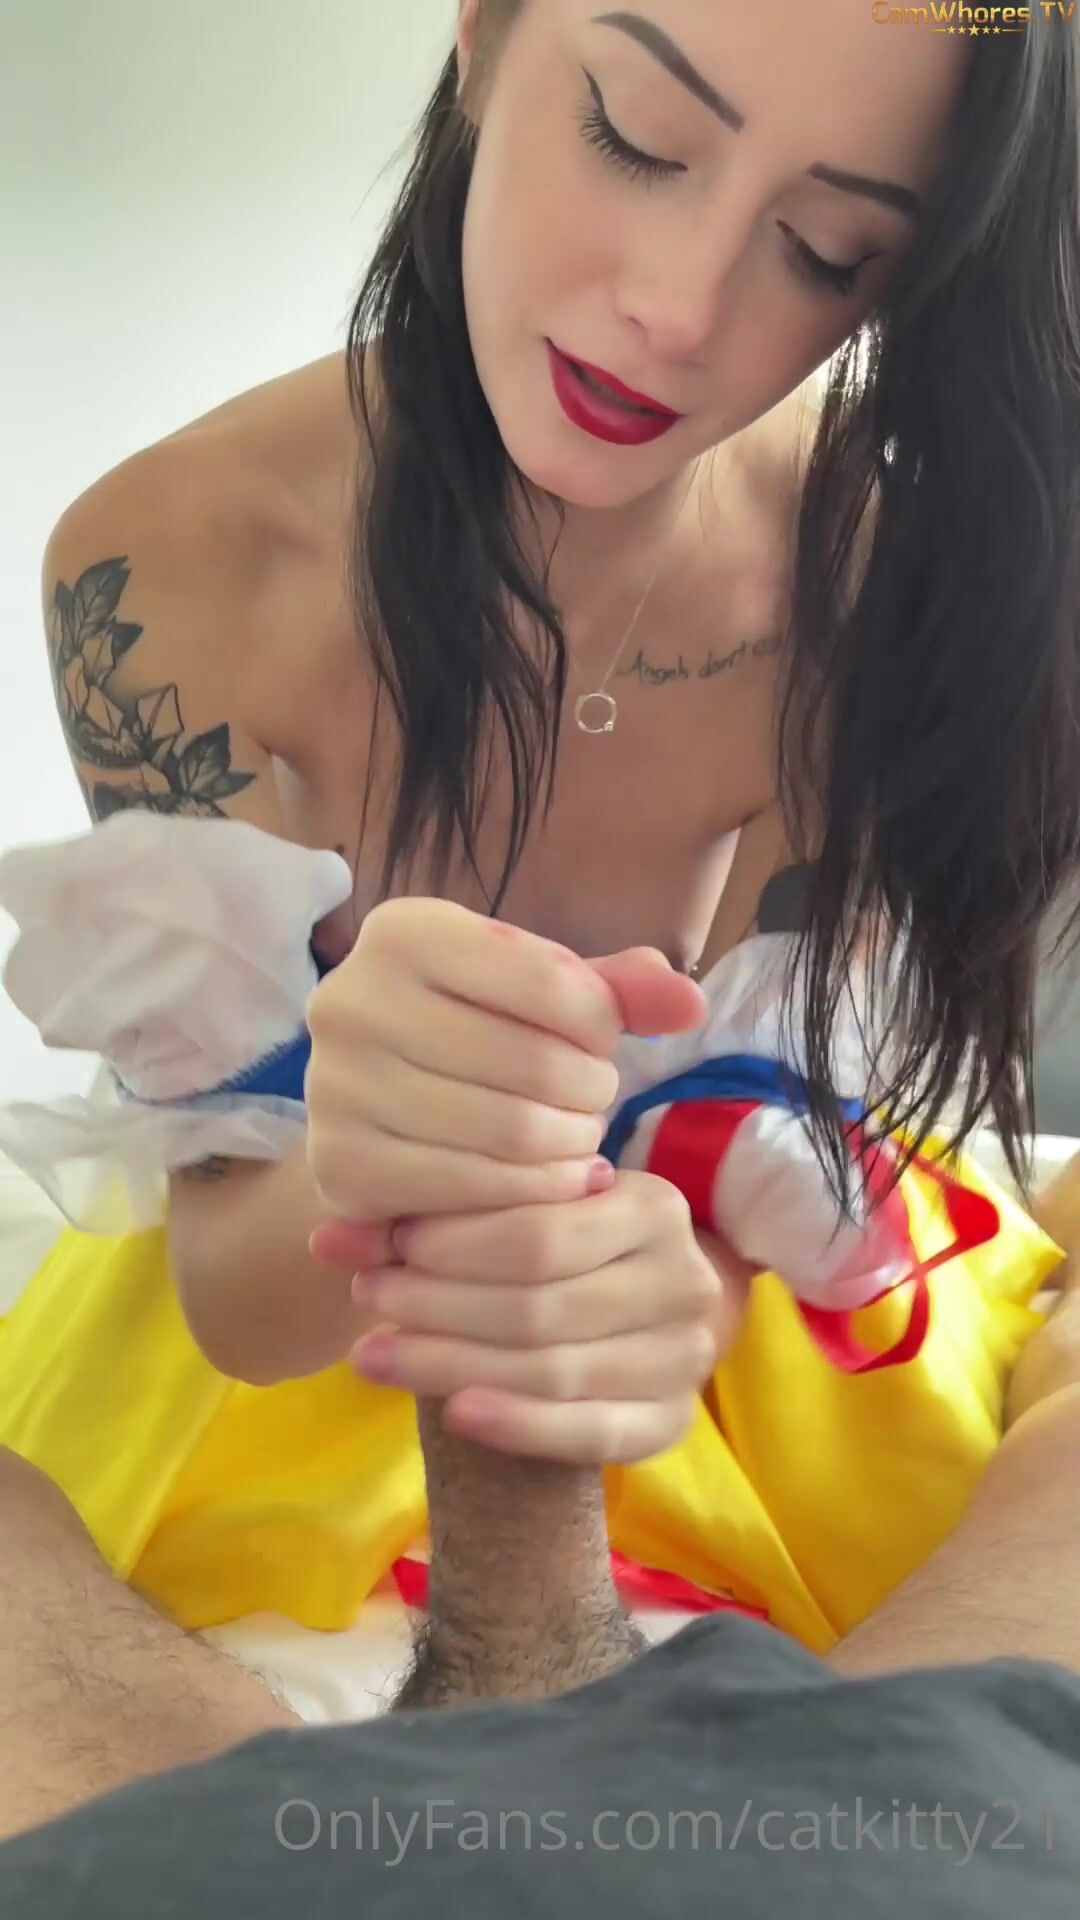 CatKitty21 ONlyFans Snow White Facial